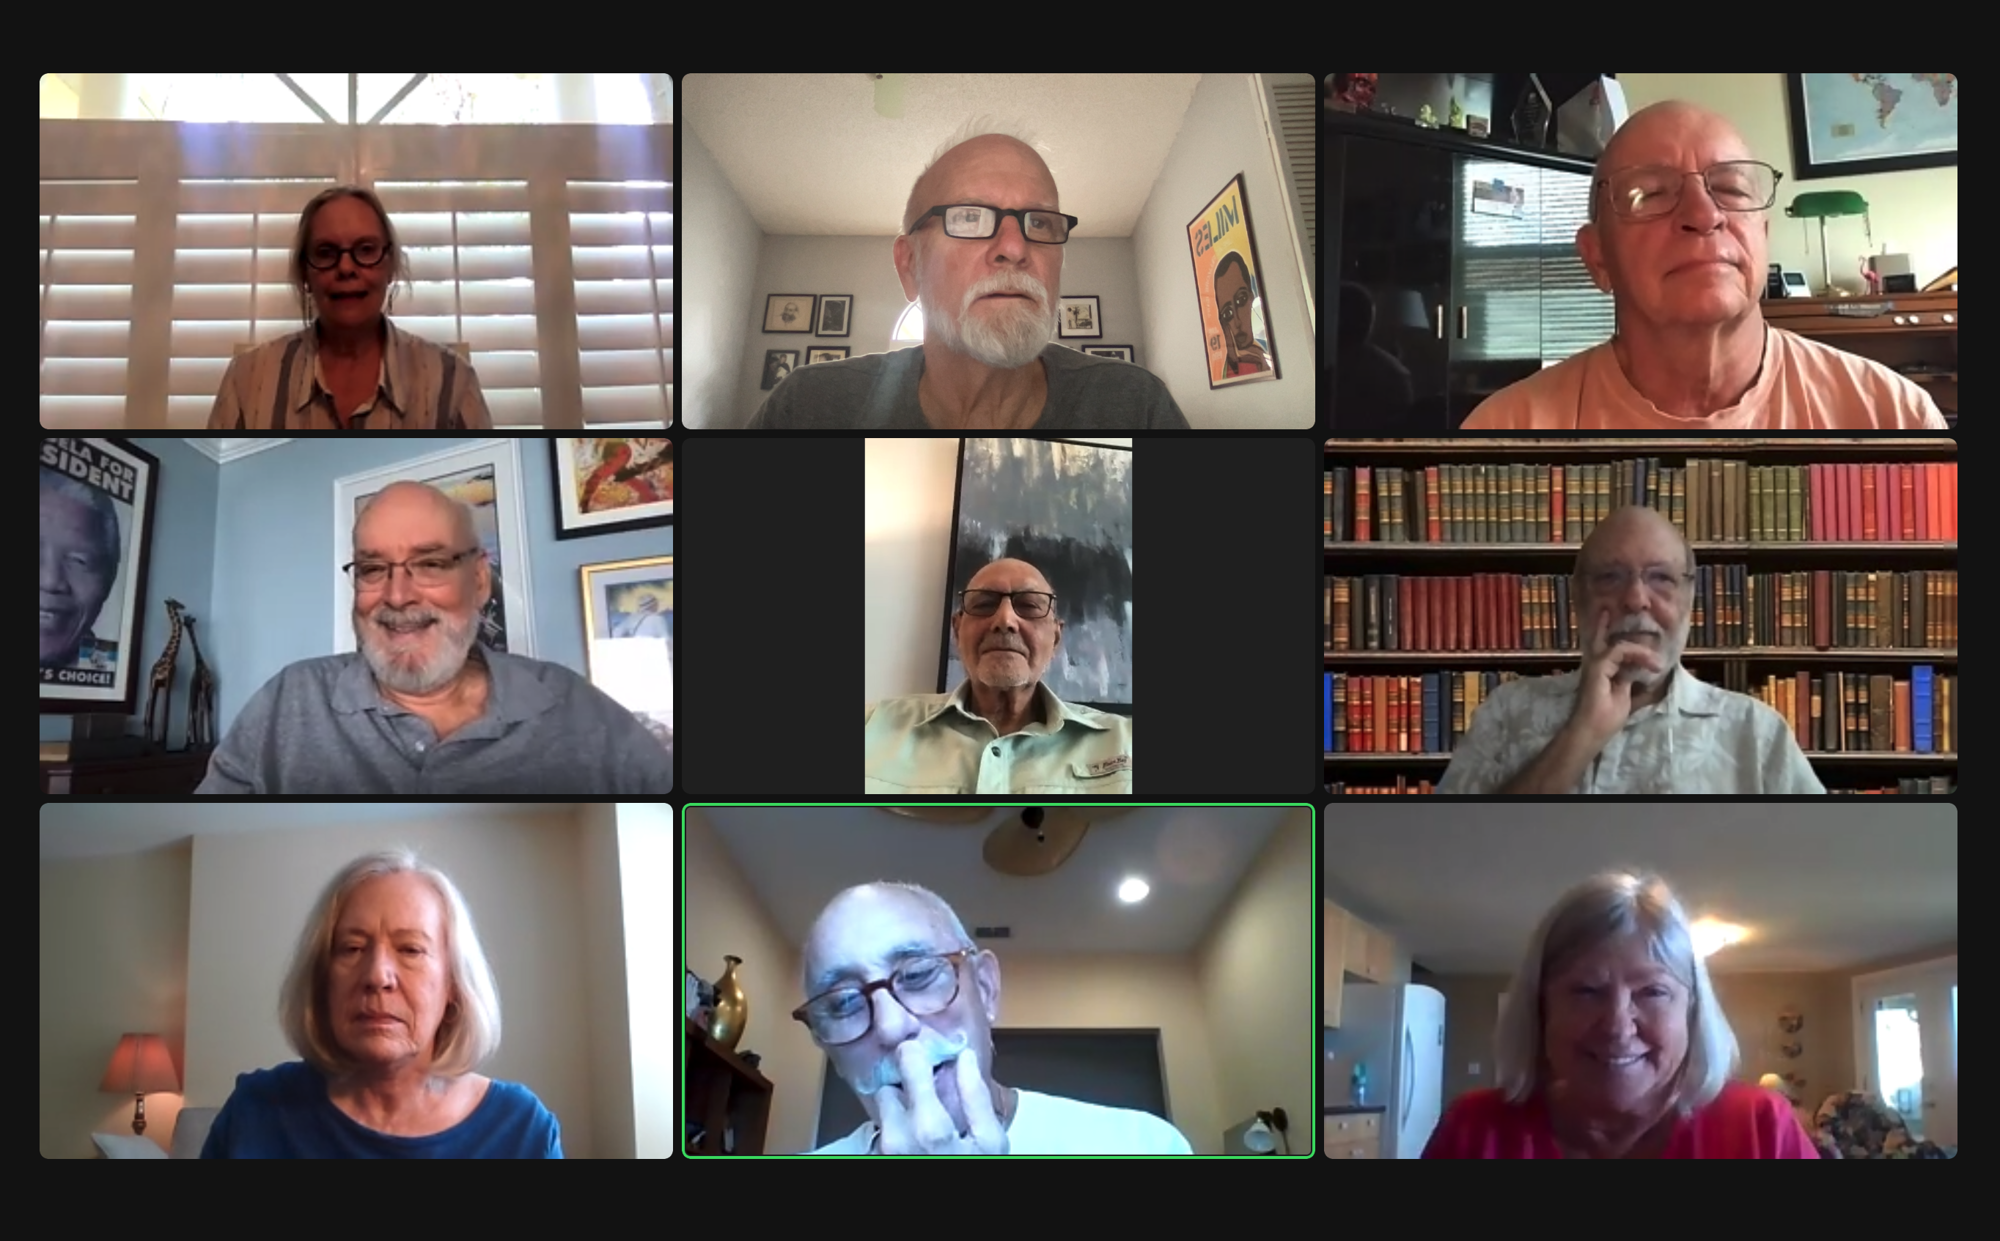 Since March 2020, the club has met via Zoom. During the meeting, members read their pieces, after which each takes the stage to comment on the work. (Photo by Eric Snider)